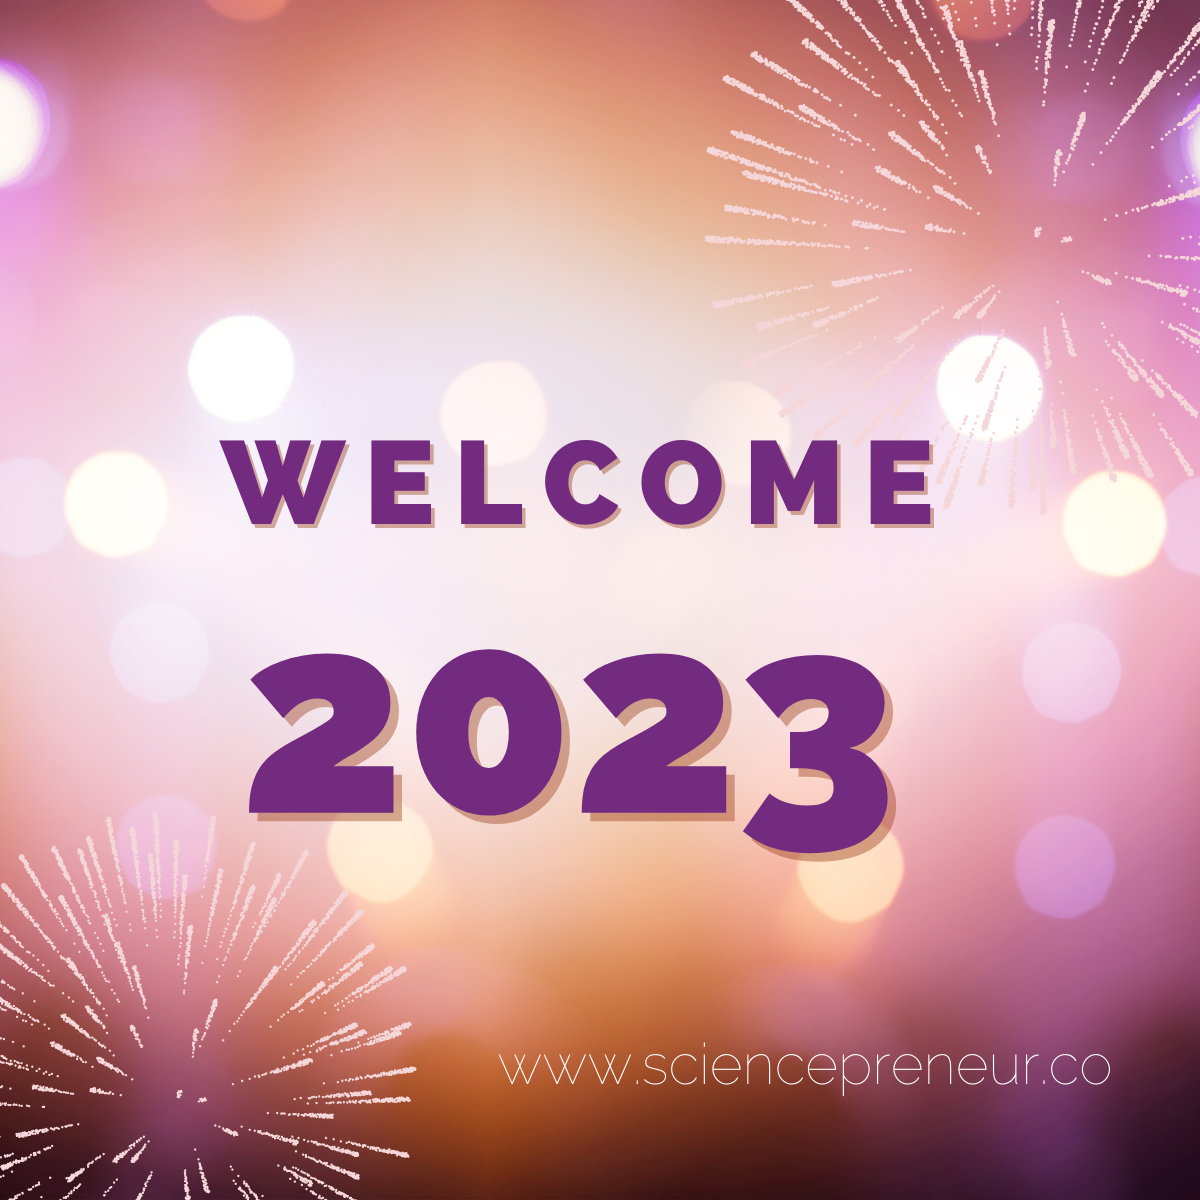 When is New Year's 2023? Here's what to know.